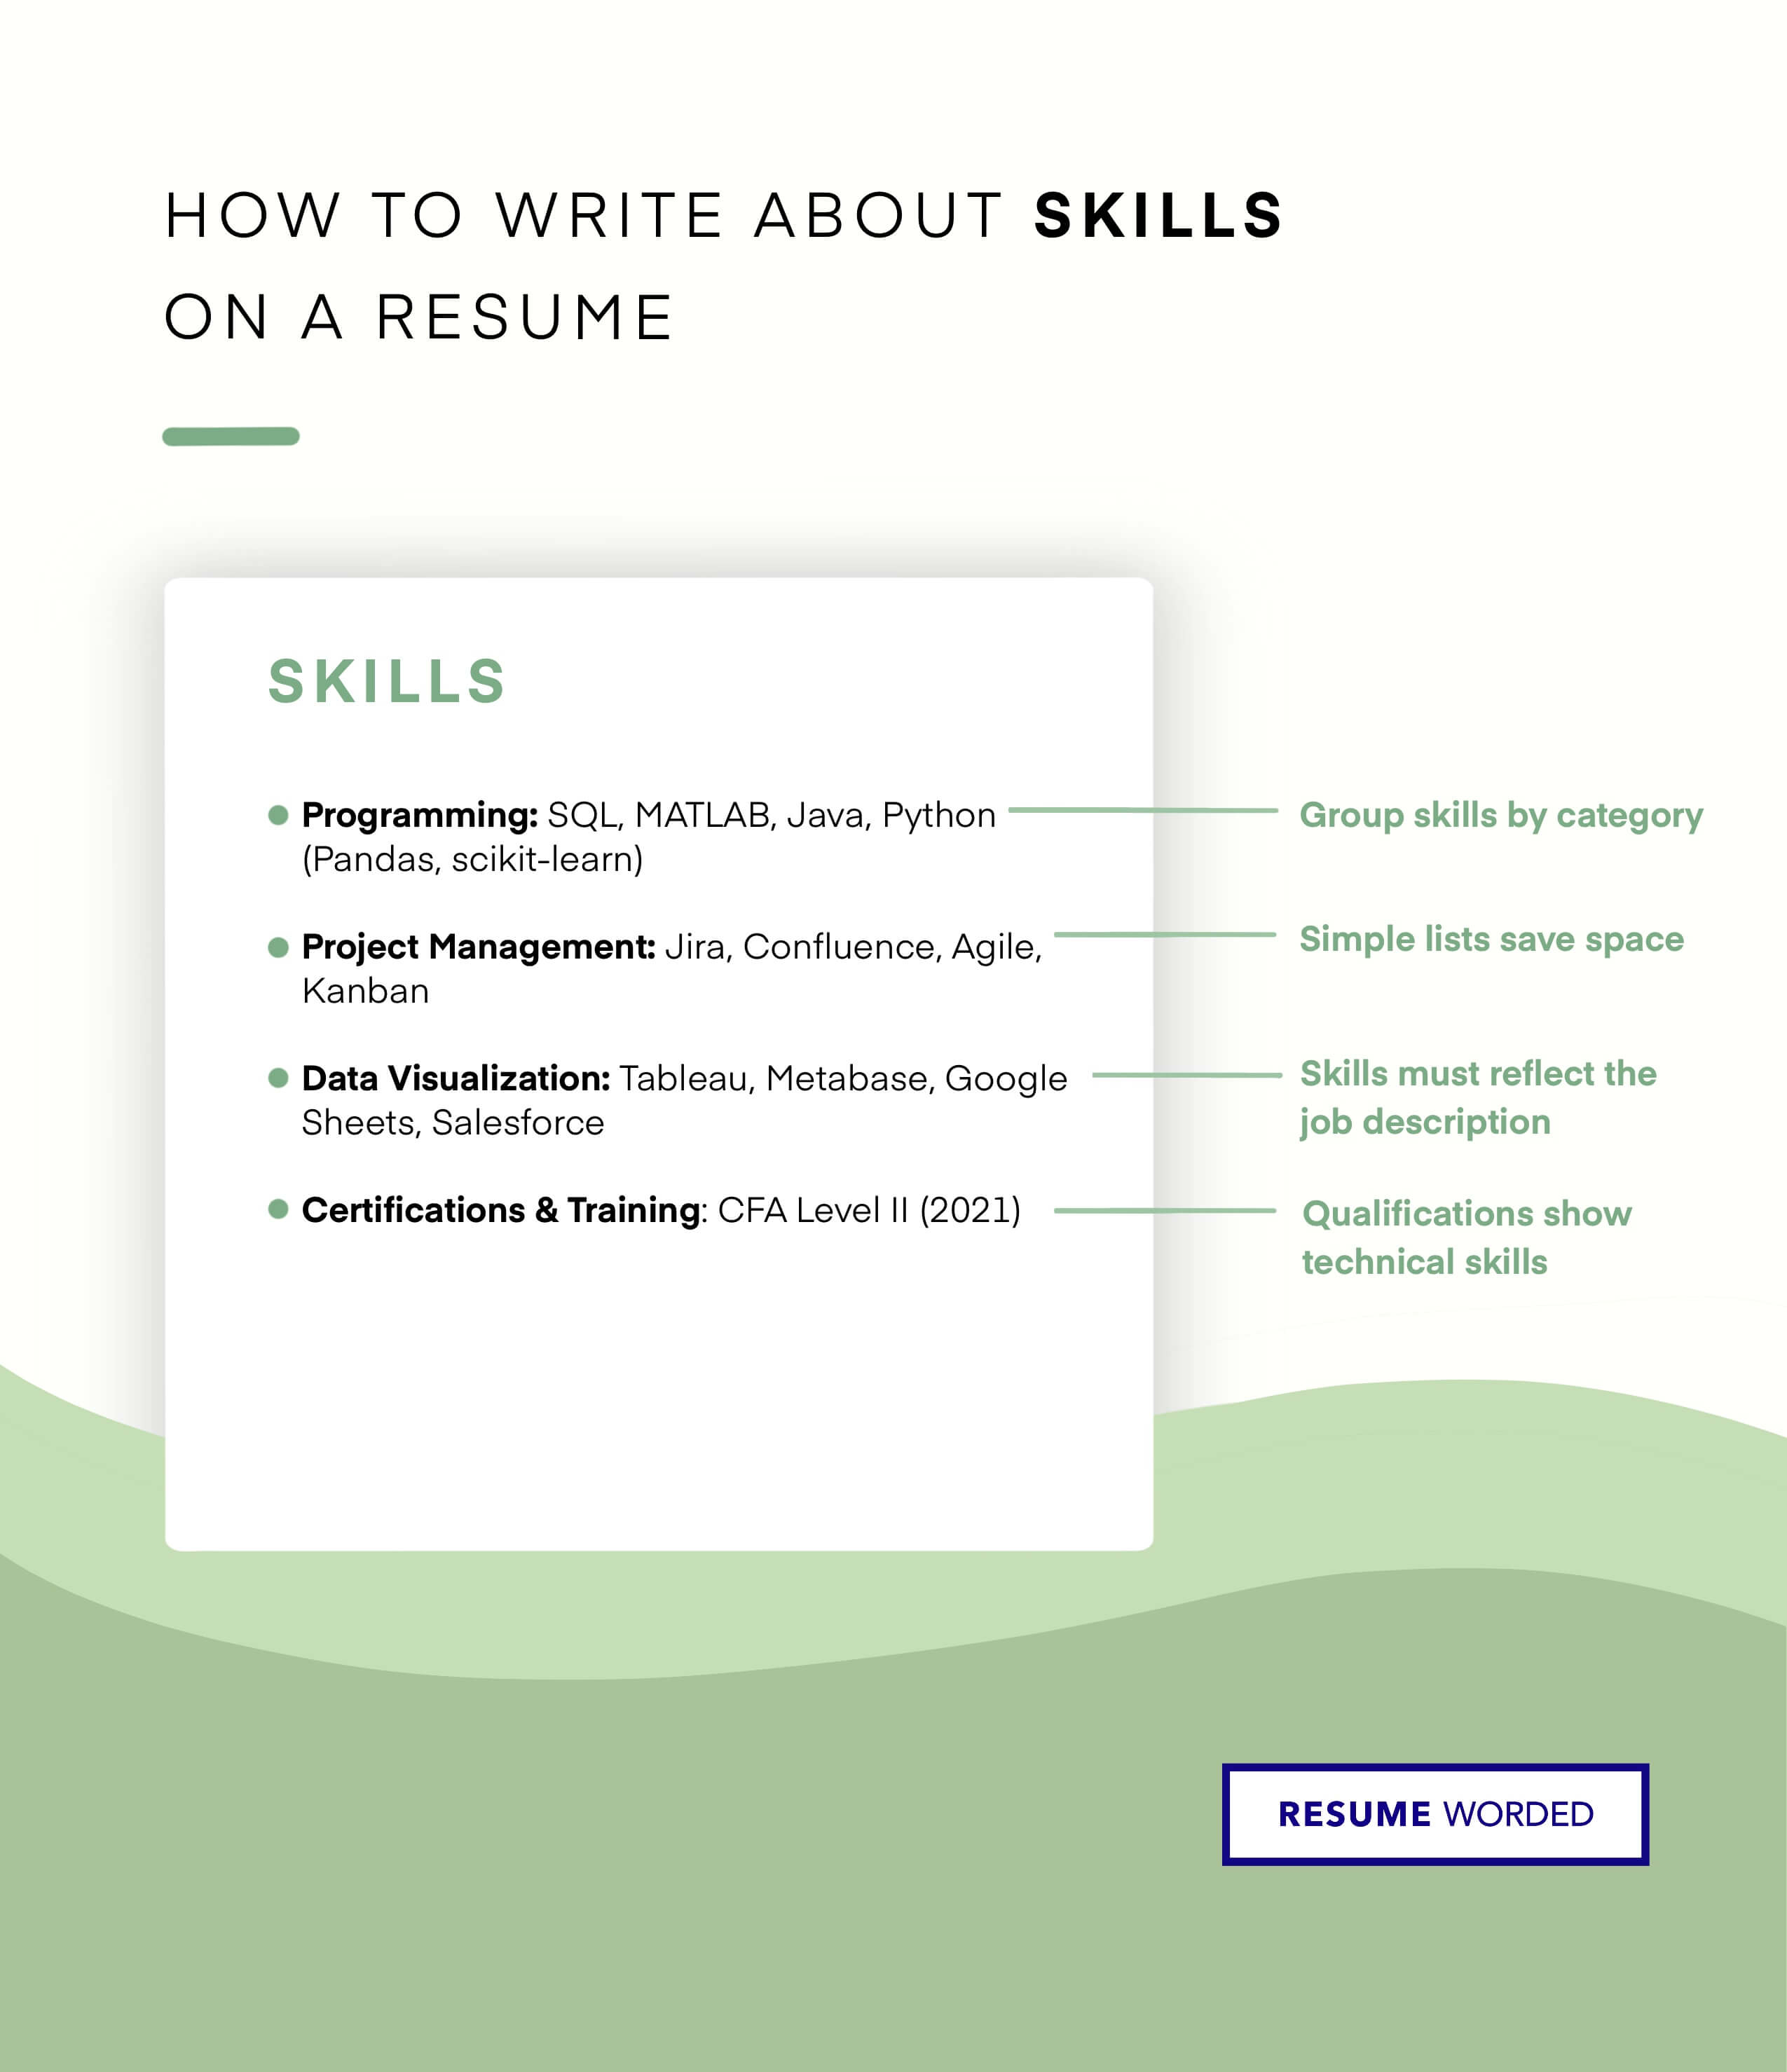 Showcase your digital literacy skills - Training Project Manager CV